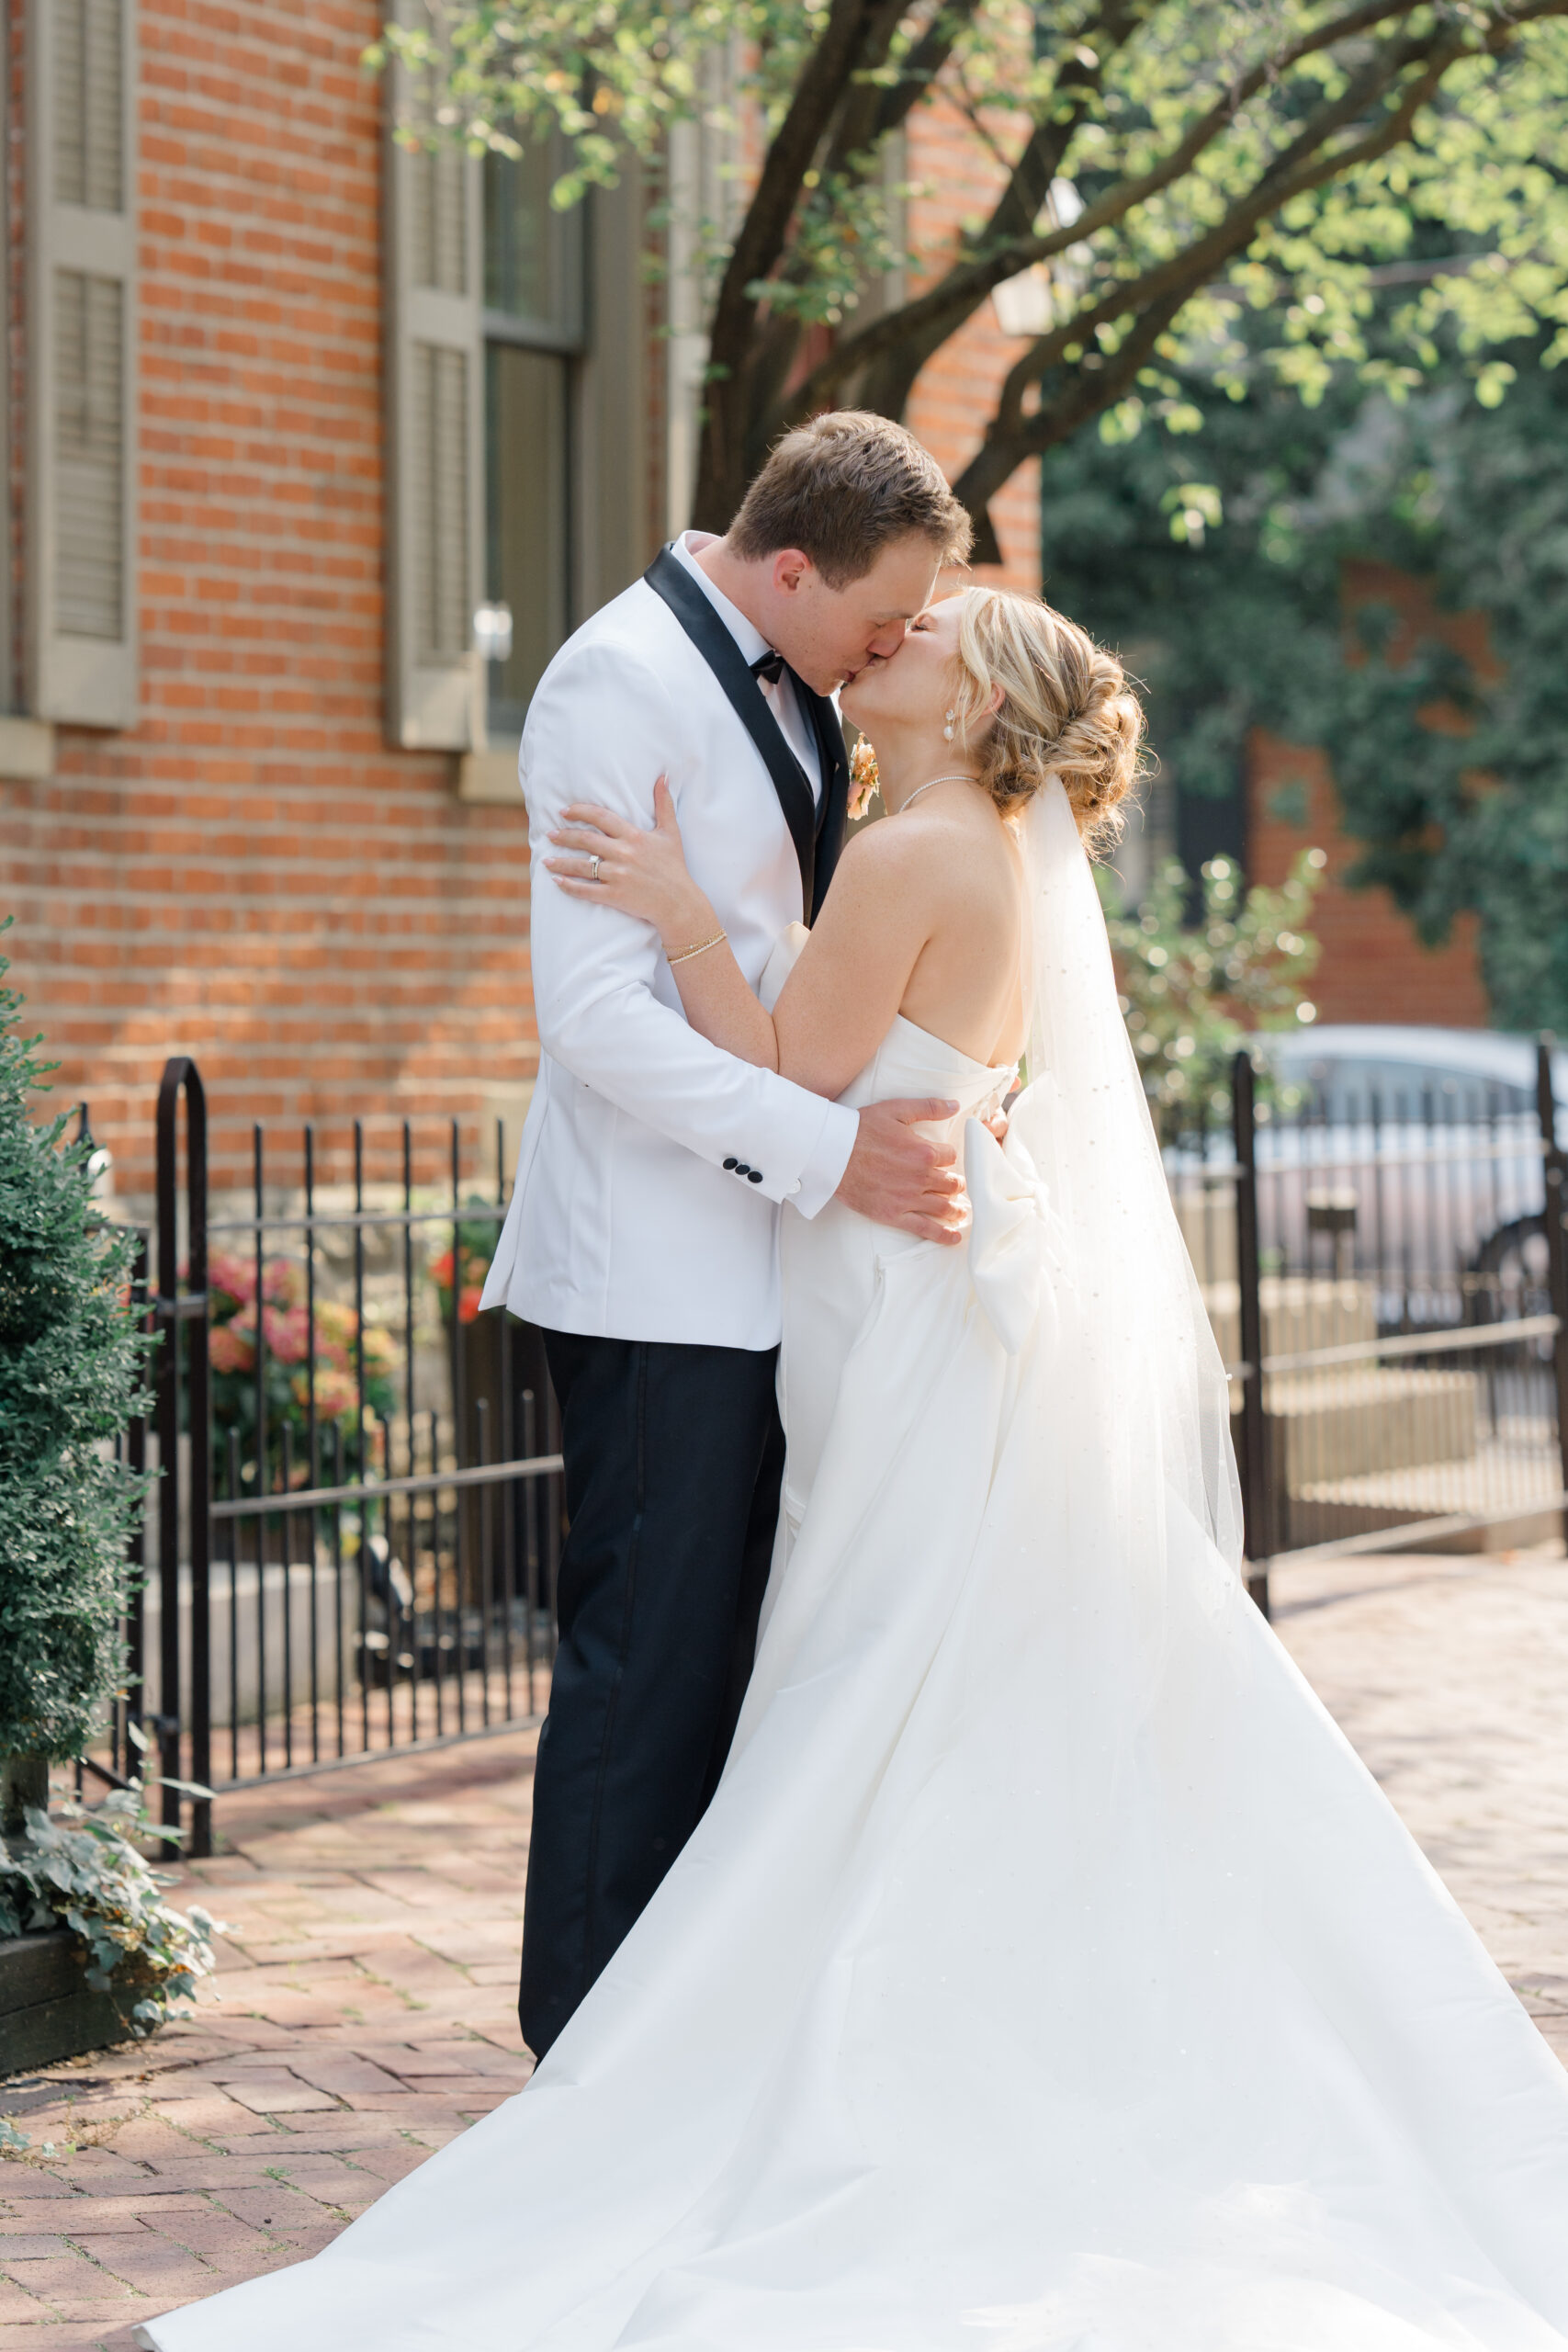 sunset wedding pictures of bride and groom kissing in downtown columbus